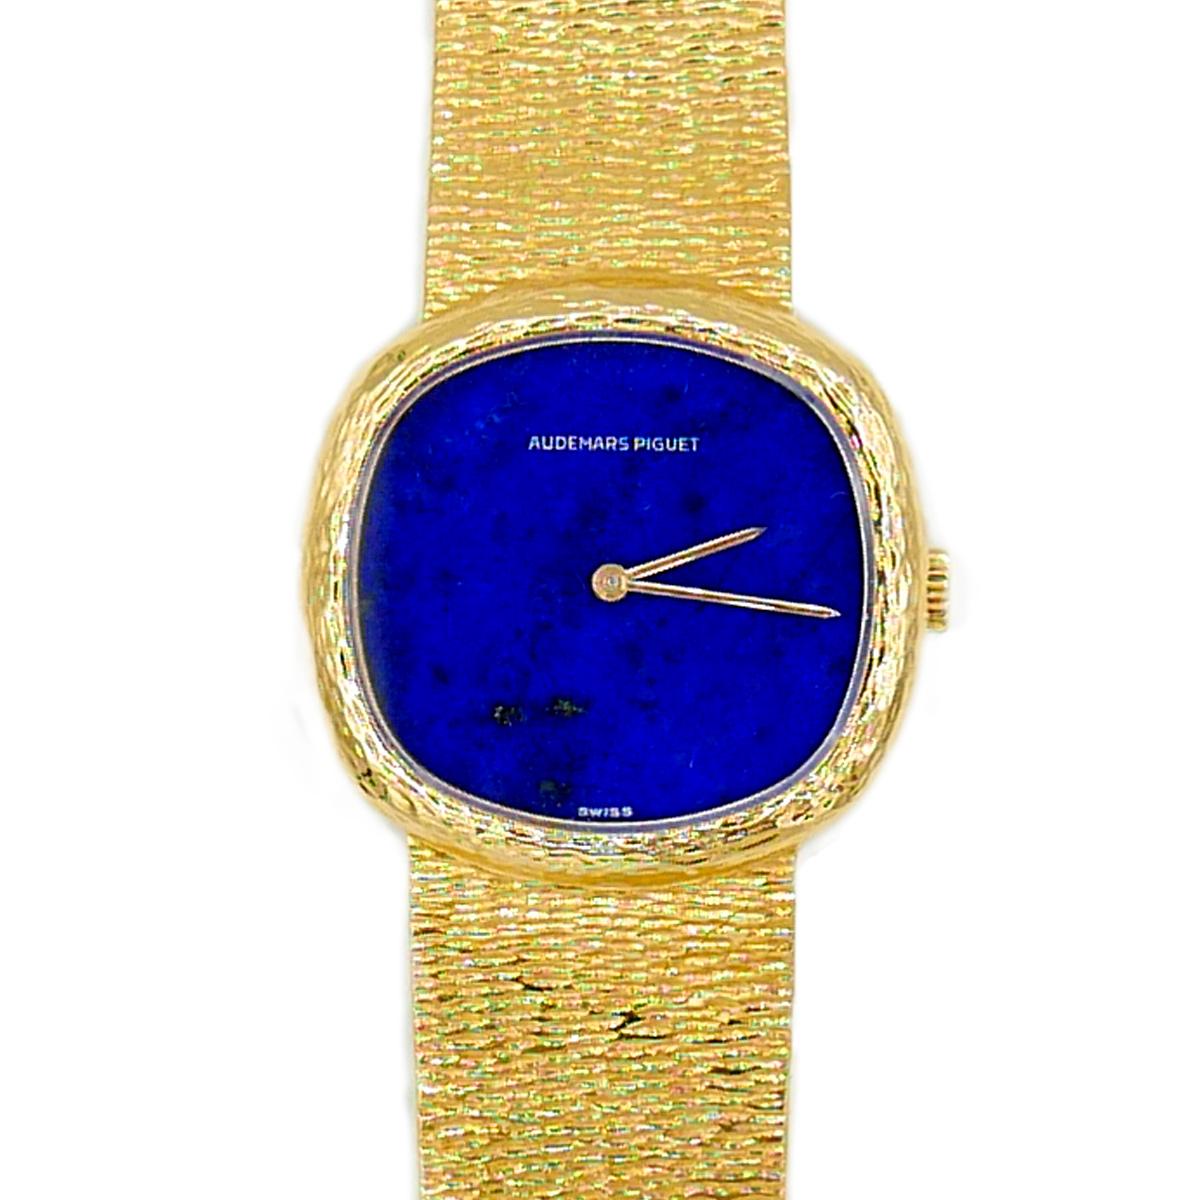 Audemars Piguet 18k Yellow Gold with 25mm Case and Lapis Dial. 
Manual wind
Serial number 88651
c.1970s

Our watches come with a one year mechanical warranty. 